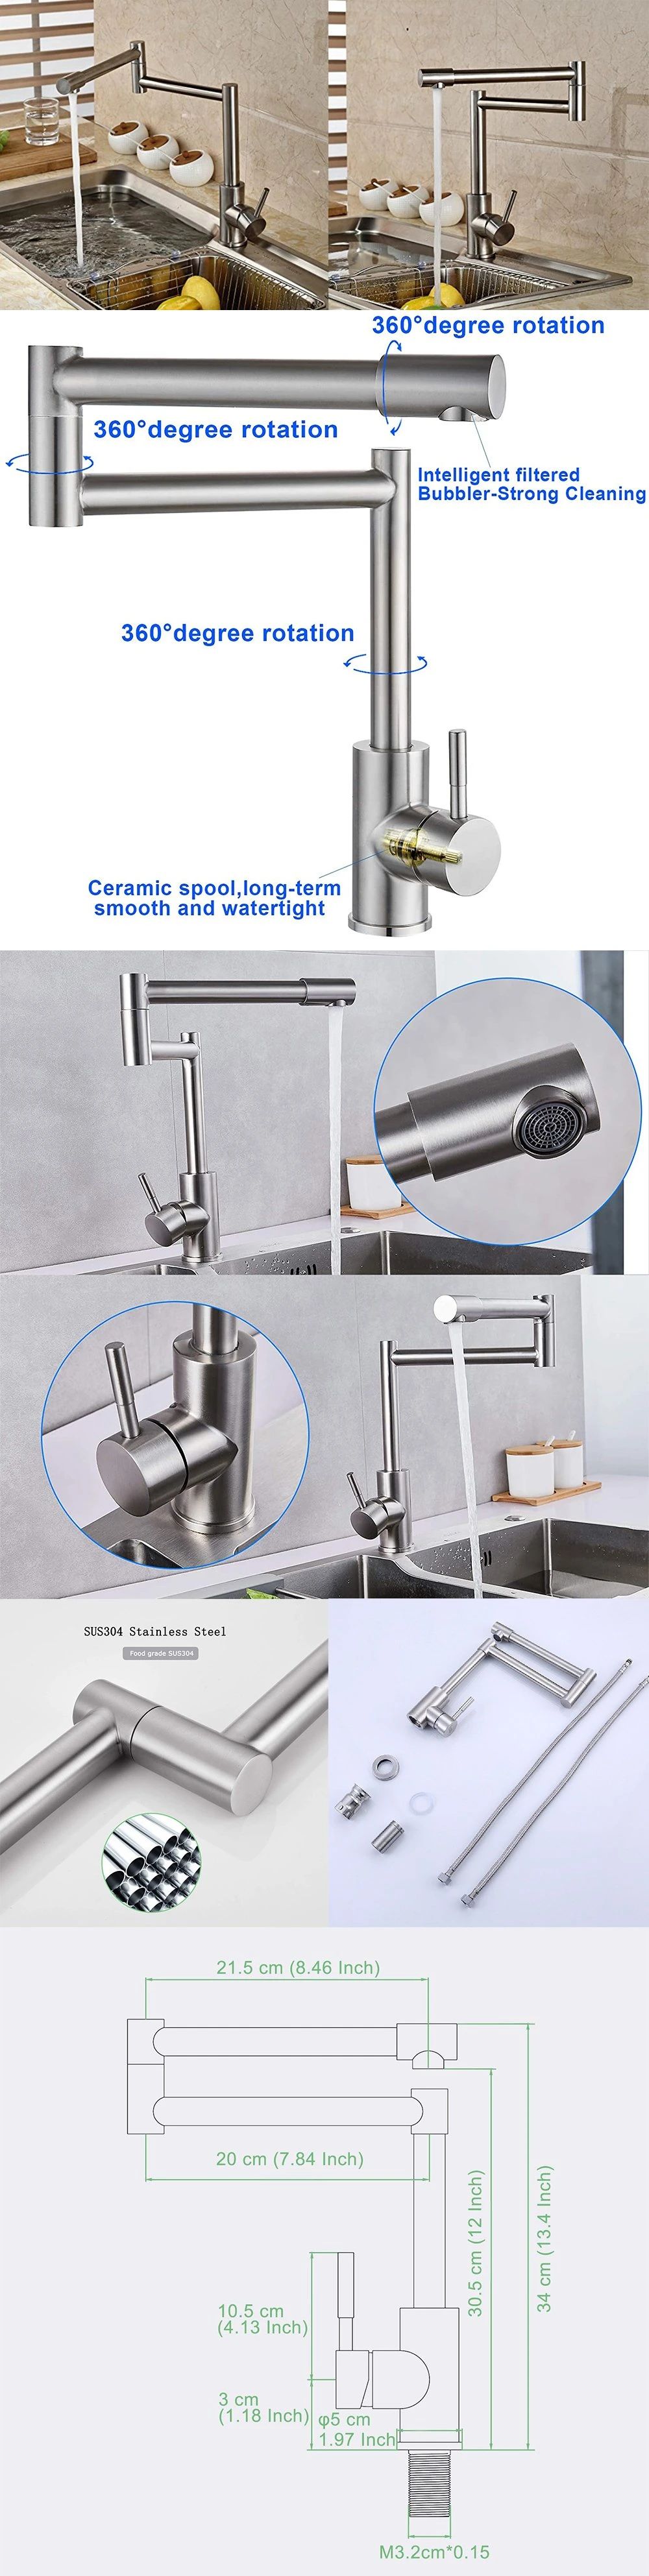 Aquacubic Brushed Nickel Finish Deck Mount Pot Filler Kitchen Faucet with Extension Shank